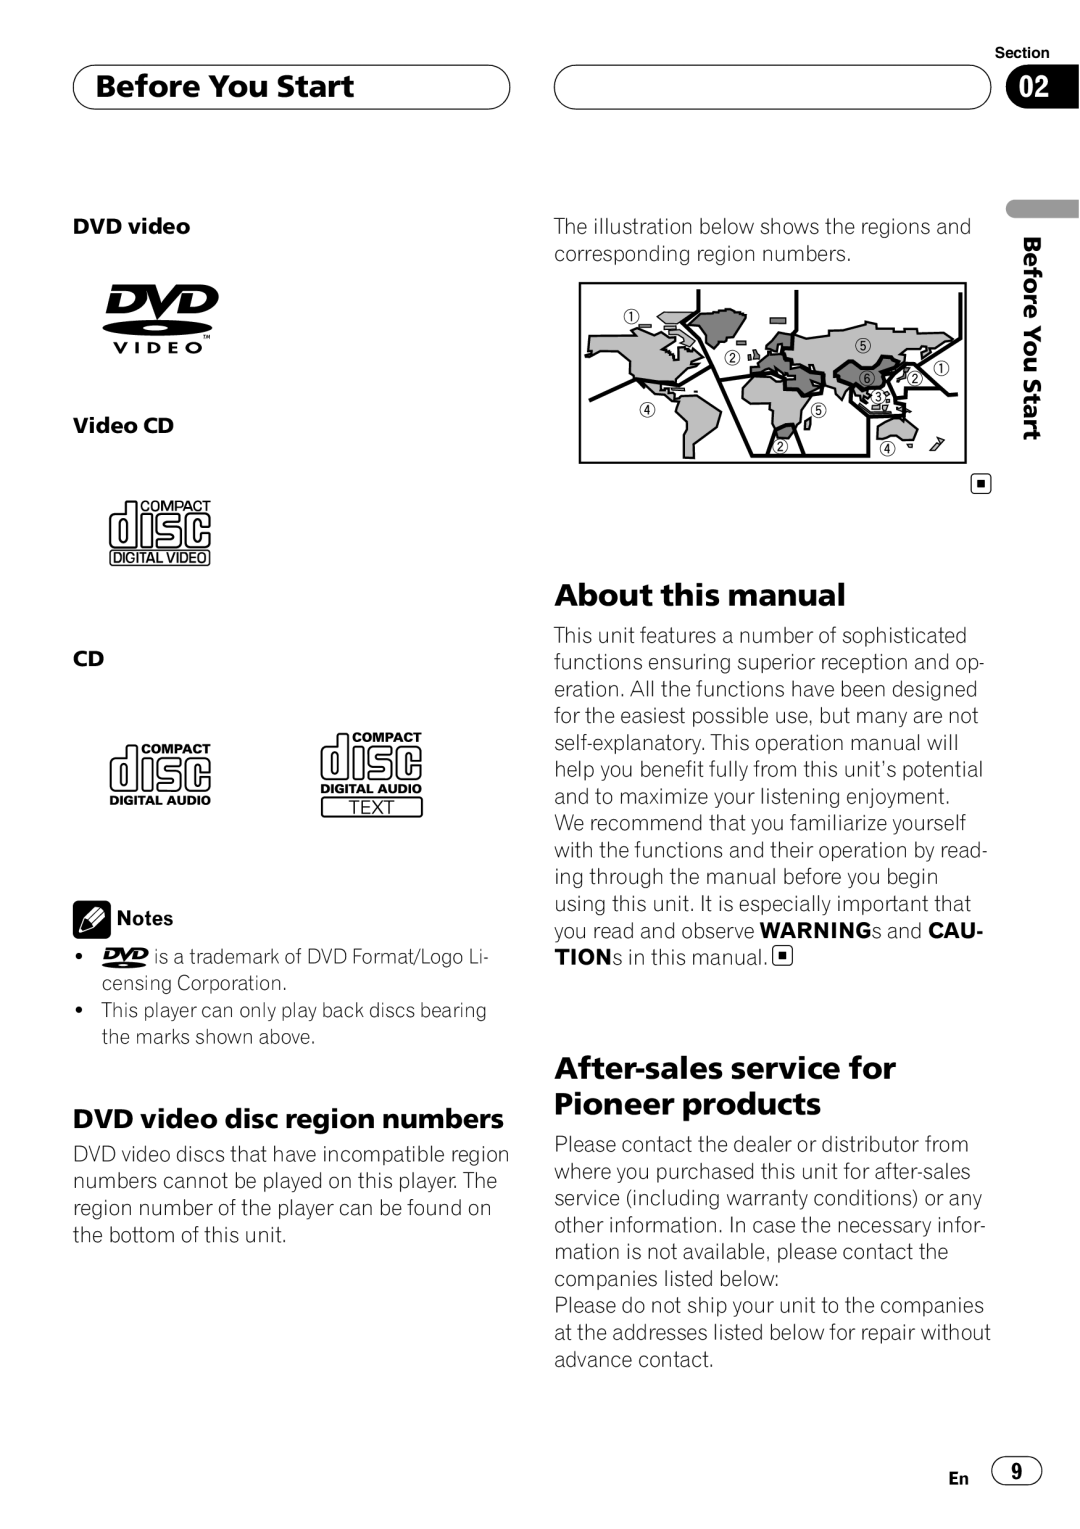 Pioneer AVH-P6800DVD Before You Start, About this manual, After-salesservice for Pioneer products, BeforeYou Start 